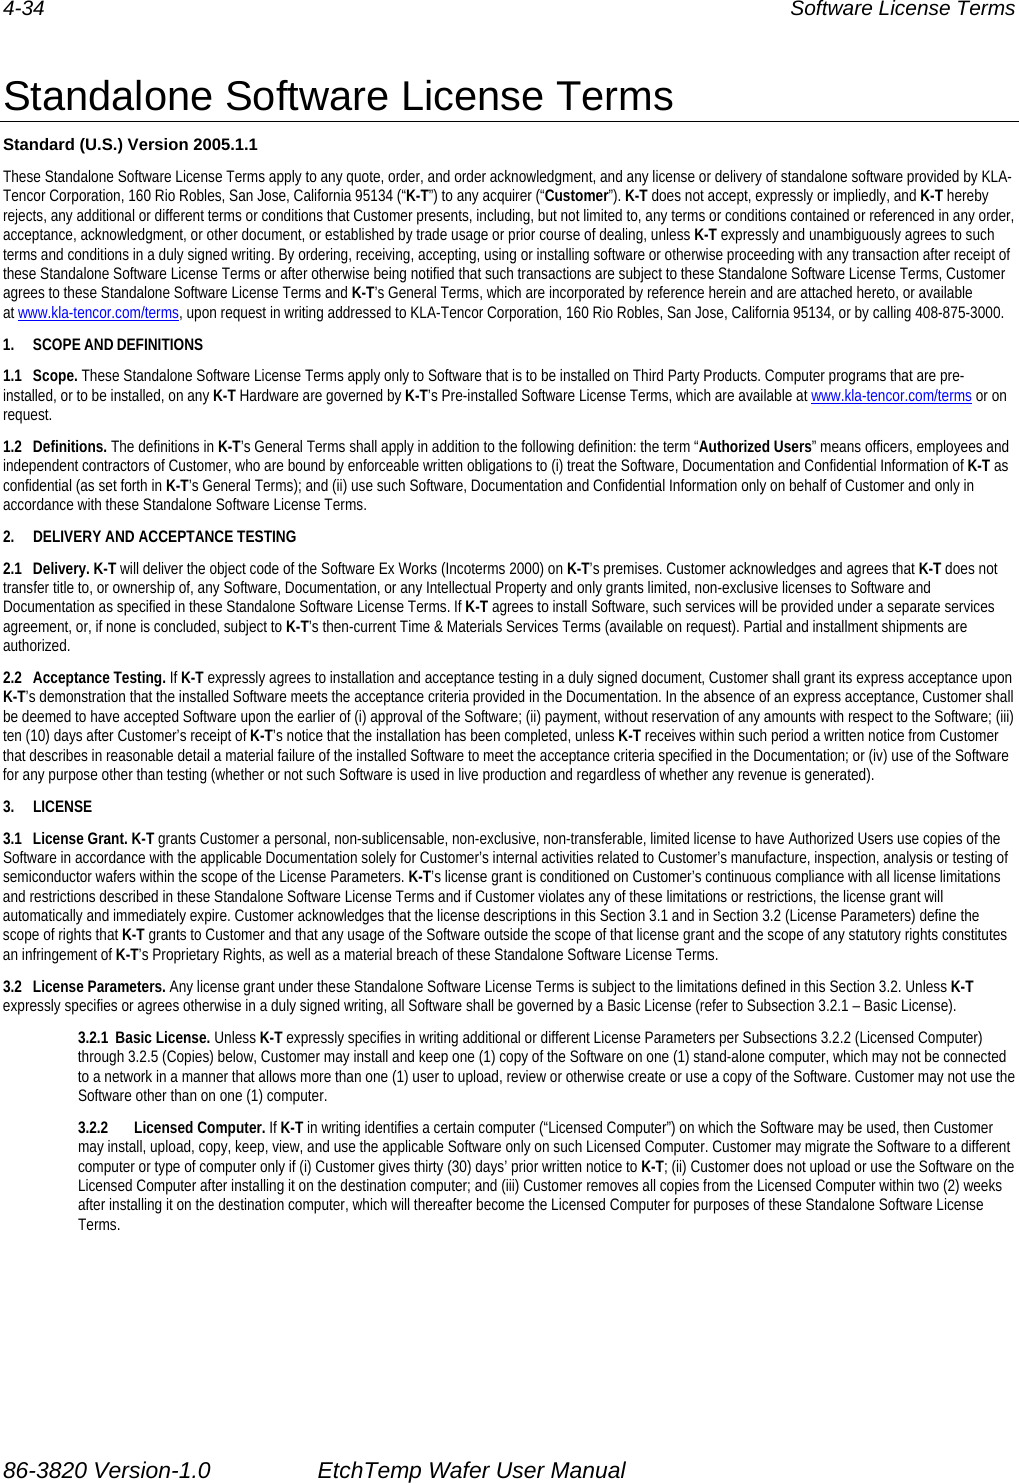 4-34  Software License Terms  Standalone Software License Terms Standard (U.S.) Version 2005.1.1 These Standalone Software License Terms apply to any quote, order, and order acknowledgment, and any license or delivery of standalone software provided by KLA-Tencor Corporation, 160 Rio Robles, San Jose, California 95134 (“K-T”) to any acquirer (“Customer”). K-T does not accept, expressly or impliedly, and K-T hereby rejects, any additional or different terms or conditions that Customer presents, including, but not limited to, any terms or conditions contained or referenced in any order, acceptance, acknowledgment, or other document, or established by trade usage or prior course of dealing, unless K-T expressly and unambiguously agrees to such terms and conditions in a duly signed writing. By ordering, receiving, accepting, using or installing software or otherwise proceeding with any transaction after receipt of these Standalone Software License Terms or after otherwise being notified that such transactions are subject to these Standalone Software License Terms, Customer agrees to these Standalone Software License Terms and K-T’s General Terms, which are incorporated by reference herein and are attached hereto, or available at www.kla-tencor.com/terms, upon request in writing addressed to KLA-Tencor Corporation, 160 Rio Robles, San Jose, California 95134, or by calling 408-875-3000. 1. SCOPE AND DEFINITIONS 1.1 Scope. These Standalone Software License Terms apply only to Software that is to be installed on Third Party Products. Computer programs that are pre-installed, or to be installed, on any K-T Hardware are governed by K-T’s Pre-installed Software License Terms, which are available at www.kla-tencor.com/terms or on request. 1.2 Definitions. The definitions in K-T’s General Terms shall apply in addition to the following definition: the term “Authorized Users” means officers, employees and independent contractors of Customer, who are bound by enforceable written obligations to (i) treat the Software, Documentation and Confidential Information of K-T as confidential (as set forth in K-T’s General Terms); and (ii) use such Software, Documentation and Confidential Information only on behalf of Customer and only in accordance with these Standalone Software License Terms. 2.  DELIVERY AND ACCEPTANCE TESTING 2.1 Delivery. K-T will deliver the object code of the Software Ex Works (Incoterms 2000) on K-T’s premises. Customer acknowledges and agrees that K-T does not transfer title to, or ownership of, any Software, Documentation, or any Intellectual Property and only grants limited, non-exclusive licenses to Software and Documentation as specified in these Standalone Software License Terms. If K-T agrees to install Software, such services will be provided under a separate services agreement, or, if none is concluded, subject to K-T’s then-current Time &amp; Materials Services Terms (available on request). Partial and installment shipments are authorized. 2.2 Acceptance Testing. If K-T expressly agrees to installation and acceptance testing in a duly signed document, Customer shall grant its express acceptance upon K-T’s demonstration that the installed Software meets the acceptance criteria provided in the Documentation. In the absence of an express acceptance, Customer shall be deemed to have accepted Software upon the earlier of (i) approval of the Software; (ii) payment, without reservation of any amounts with respect to the Software; (iii) ten (10) days after Customer’s receipt of K-T’s notice that the installation has been completed, unless K-T receives within such period a written notice from Customer that describes in reasonable detail a material failure of the installed Software to meet the acceptance criteria specified in the Documentation; or (iv) use of the Software for any purpose other than testing (whether or not such Software is used in live production and regardless of whether any revenue is generated). 3. LICENSE 3.1 License Grant. K-T grants Customer a personal, non-sublicensable, non-exclusive, non-transferable, limited license to have Authorized Users use copies of the Software in accordance with the applicable Documentation solely for Customer’s internal activities related to Customer’s manufacture, inspection, analysis or testing of semiconductor wafers within the scope of the License Parameters. K-T’s license grant is conditioned on Customer’s continuous compliance with all license limitations and restrictions described in these Standalone Software License Terms and if Customer violates any of these limitations or restrictions, the license grant will automatically and immediately expire. Customer acknowledges that the license descriptions in this Section 3.1 and in Section 3.2 (License Parameters) define the scope of rights that K-T grants to Customer and that any usage of the Software outside the scope of that license grant and the scope of any statutory rights constitutes an infringement of K-T’s Proprietary Rights, as well as a material breach of these Standalone Software License Terms. 3.2 License Parameters. Any license grant under these Standalone Software License Terms is subject to the limitations defined in this Section 3.2. Unless K-T expressly specifies or agrees otherwise in a duly signed writing, all Software shall be governed by a Basic License (refer to Subsection 3.2.1 – Basic License). 3.2.1 Basic License. Unless K-T expressly specifies in writing additional or different License Parameters per Subsections 3.2.2 (Licensed Computer) through 3.2.5 (Copies) below, Customer may install and keep one (1) copy of the Software on one (1) stand-alone computer, which may not be connected to a network in a manner that allows more than one (1) user to upload, review or otherwise create or use a copy of the Software. Customer may not use the Software other than on one (1) computer. 3.2.2 Licensed Computer. If K-T in writing identifies a certain computer (“Licensed Computer”) on which the Software may be used, then Customer may install, upload, copy, keep, view, and use the applicable Software only on such Licensed Computer. Customer may migrate the Software to a different computer or type of computer only if (i) Customer gives thirty (30) days’ prior written notice to K-T; (ii) Customer does not upload or use the Software on the Licensed Computer after installing it on the destination computer; and (iii) Customer removes all copies from the Licensed Computer within two (2) weeks after installing it on the destination computer, which will thereafter become the Licensed Computer for purposes of these Standalone Software License Terms. 86-3820 Version-1.0  EtchTemp Wafer User Manual                                                                               